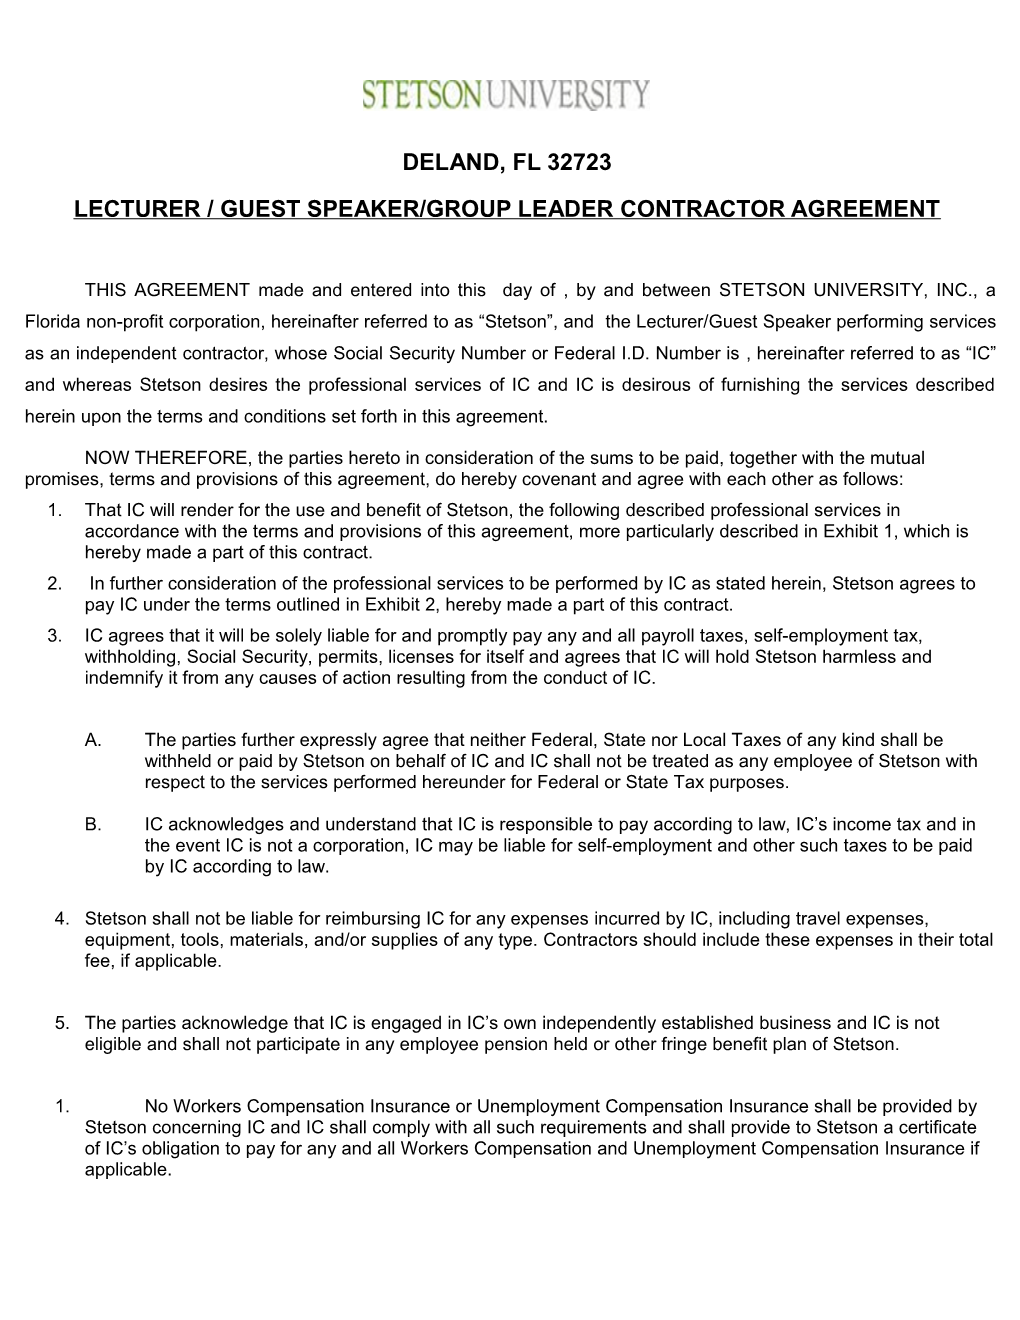 Lecturer / Guest Speaker/Group Leader Contractor Agreement